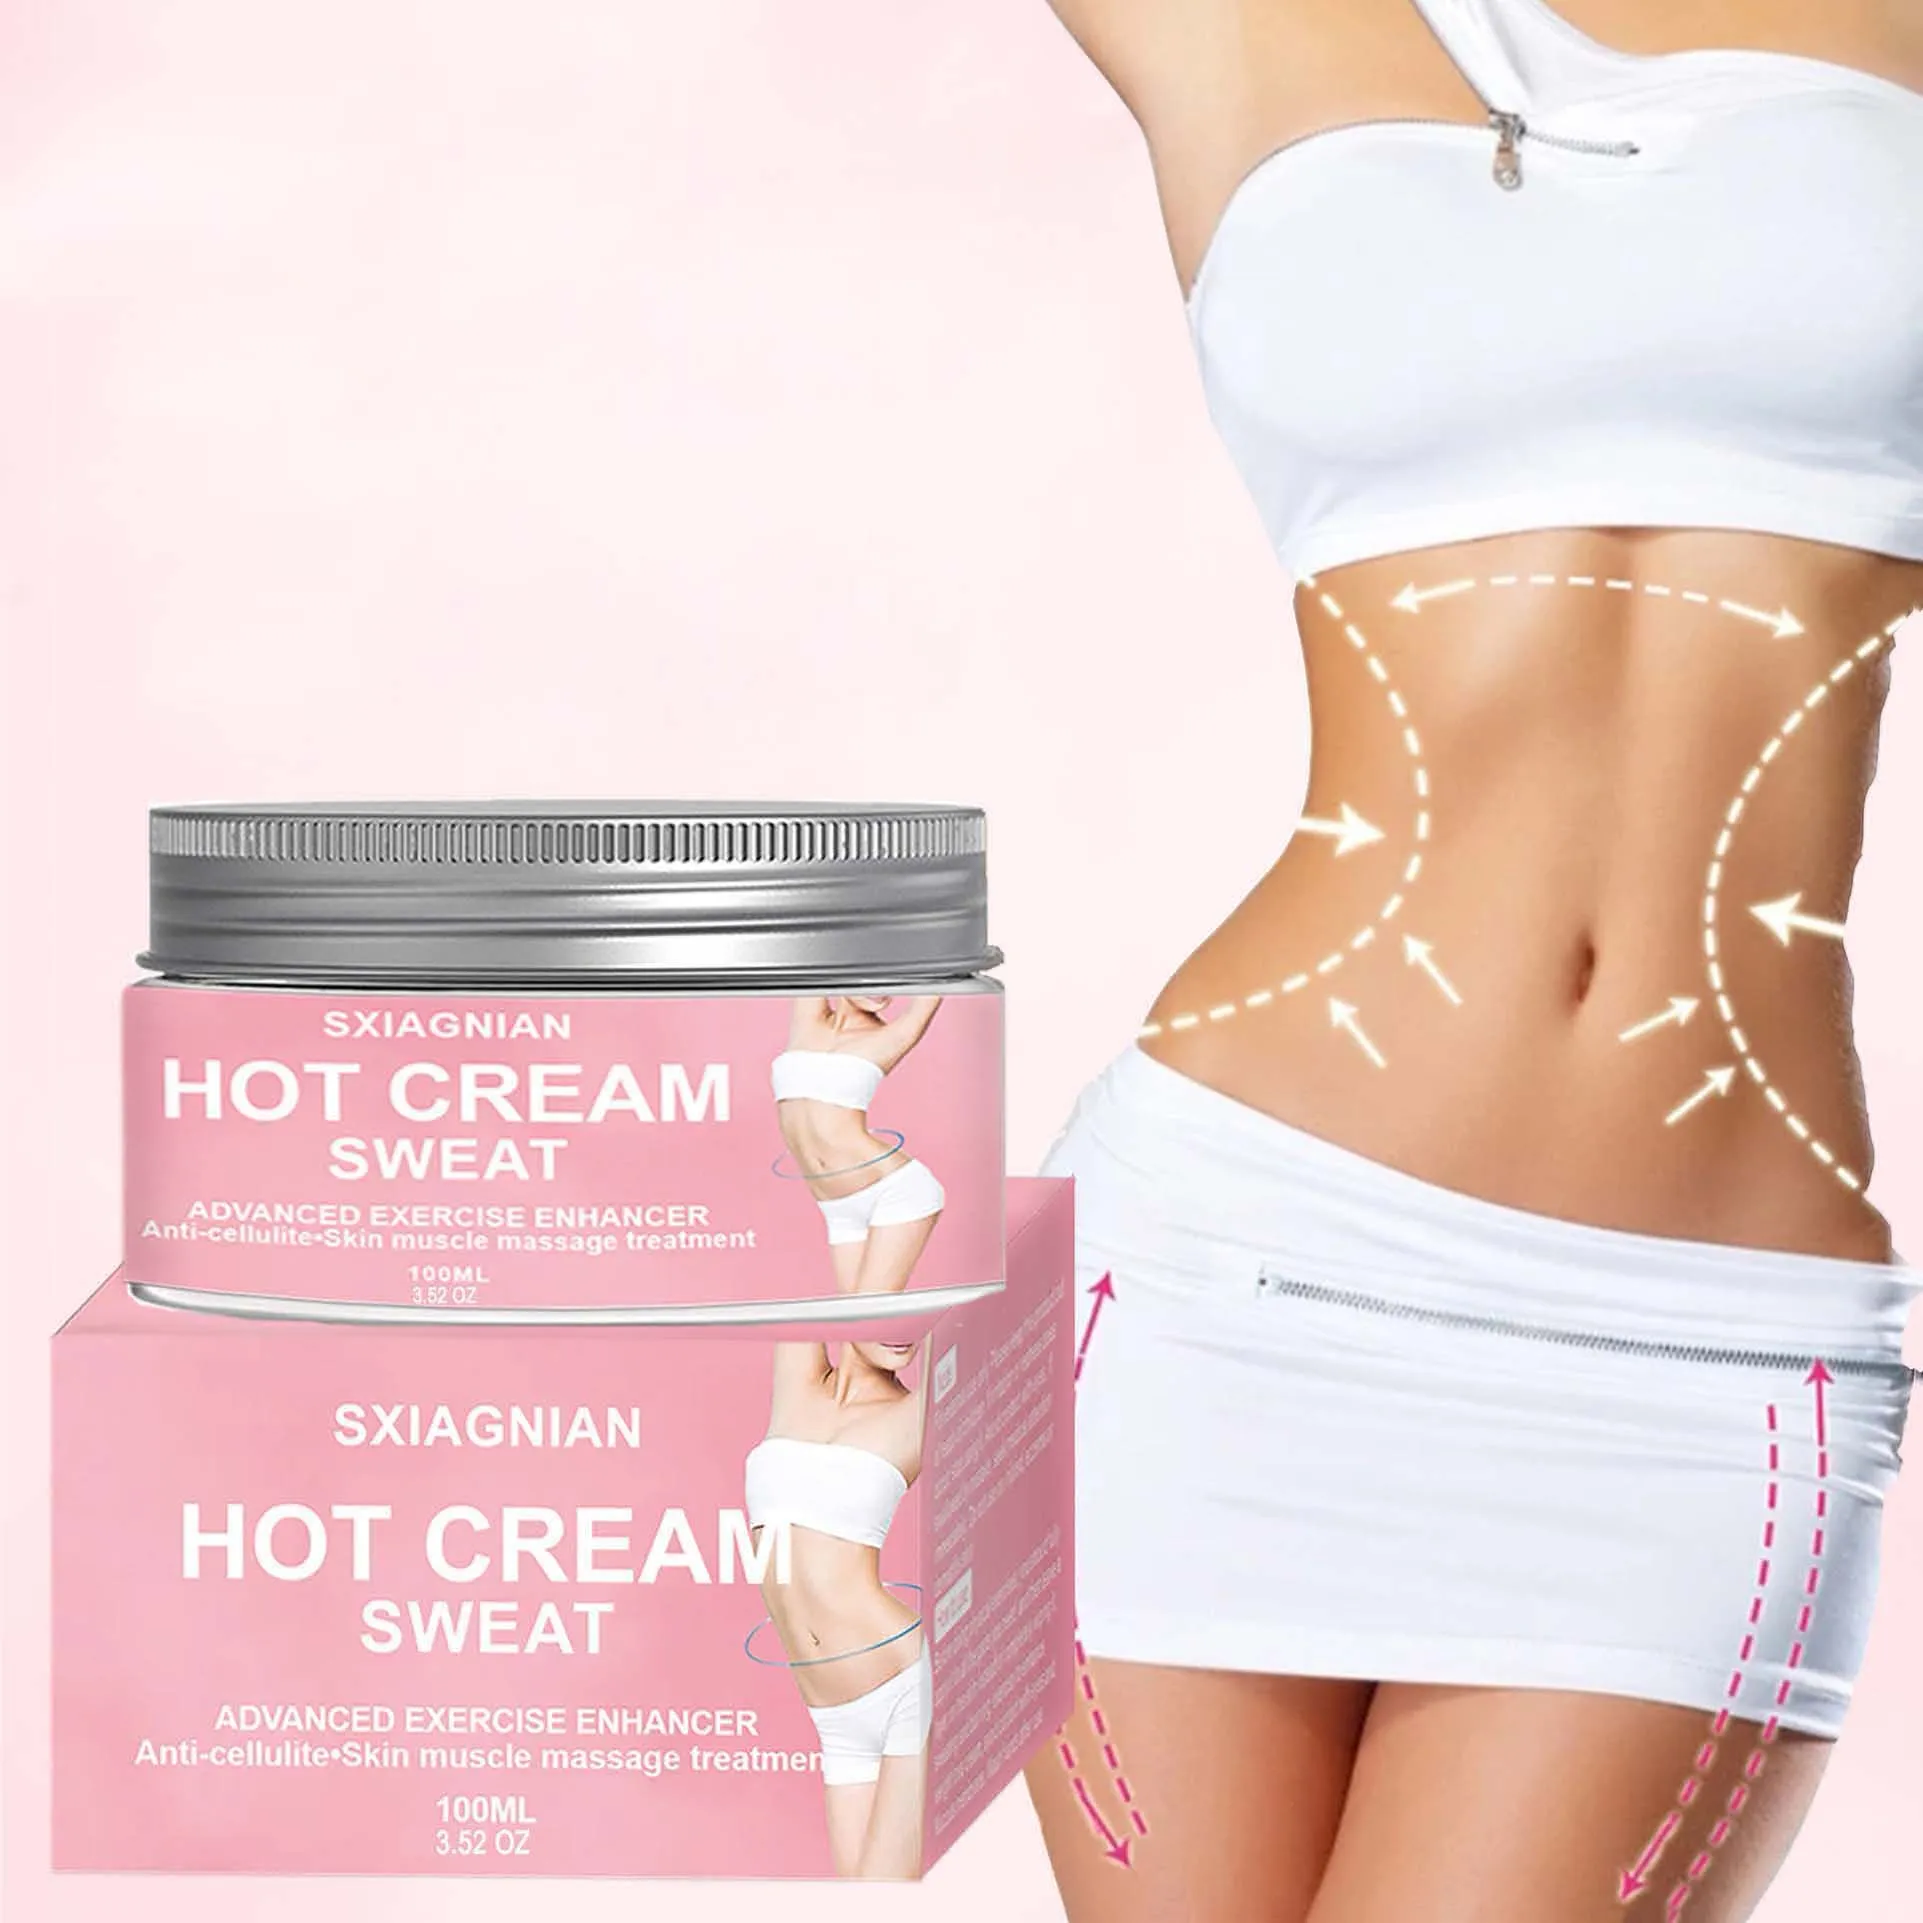 

Skin Tightening Reduce Cellulite Firming Gel Private Label Weight Loss 2020 Best Hot Leg Slimming Cream